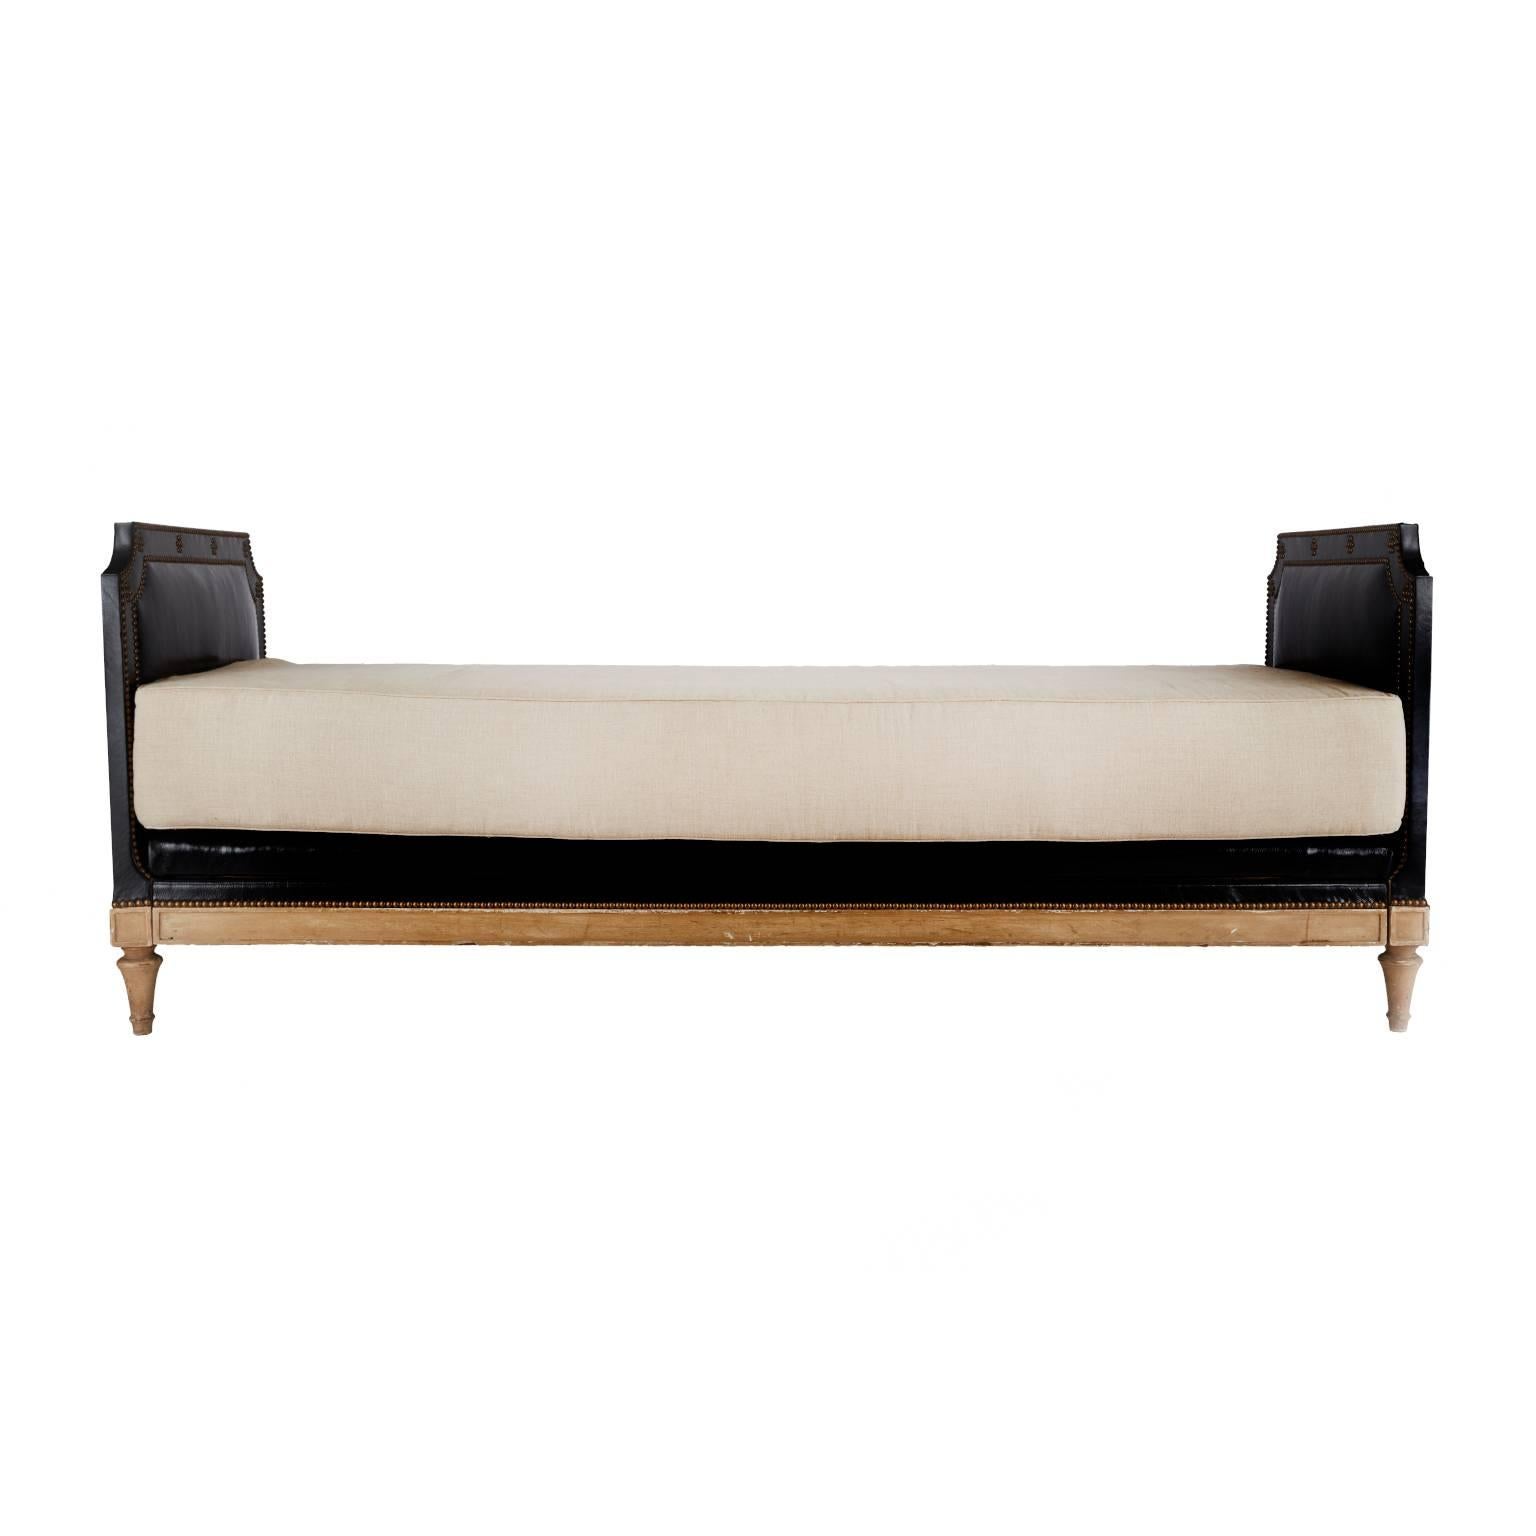 Extremely rare French Maison Jansen (signed) daybed, circa 1930s. Made for the Argentine market during a time when Argentina was extremely wealthy. Newly reupholstered in black Italian leather with brass studded details on a wooden frame. Stamped